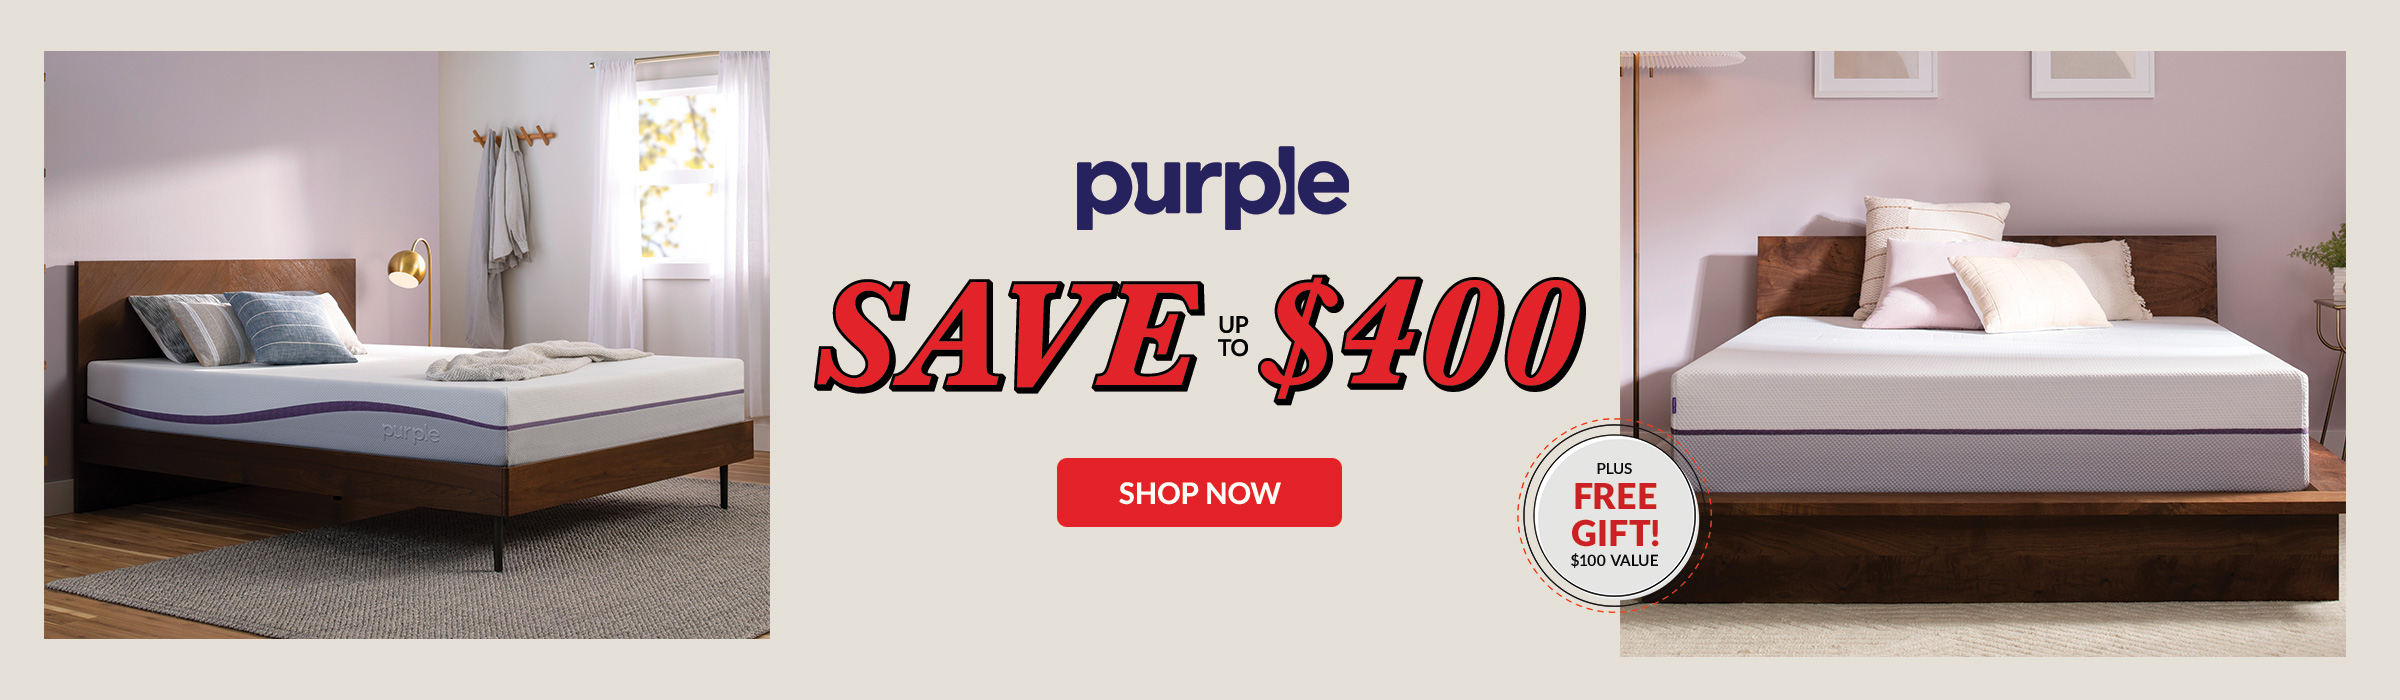 Purple Save up to $400